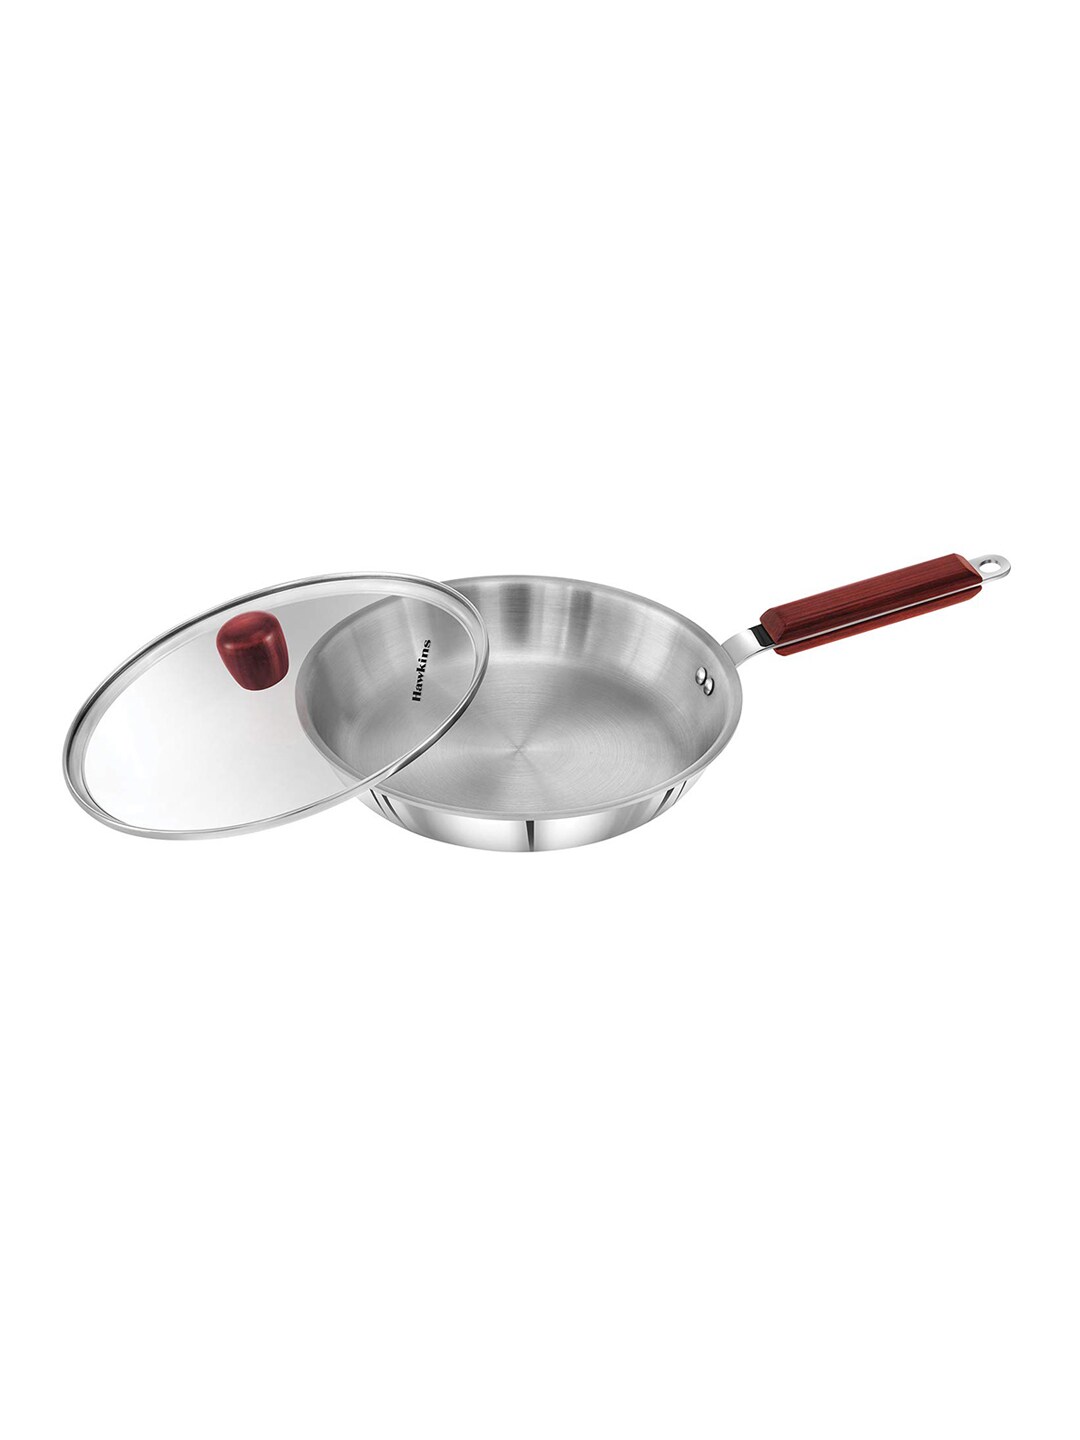 Hawkins Silver-Toned & Red Triply 3 mm Extra-Thick Stainless Steel Frying Pan With Lid Price in India